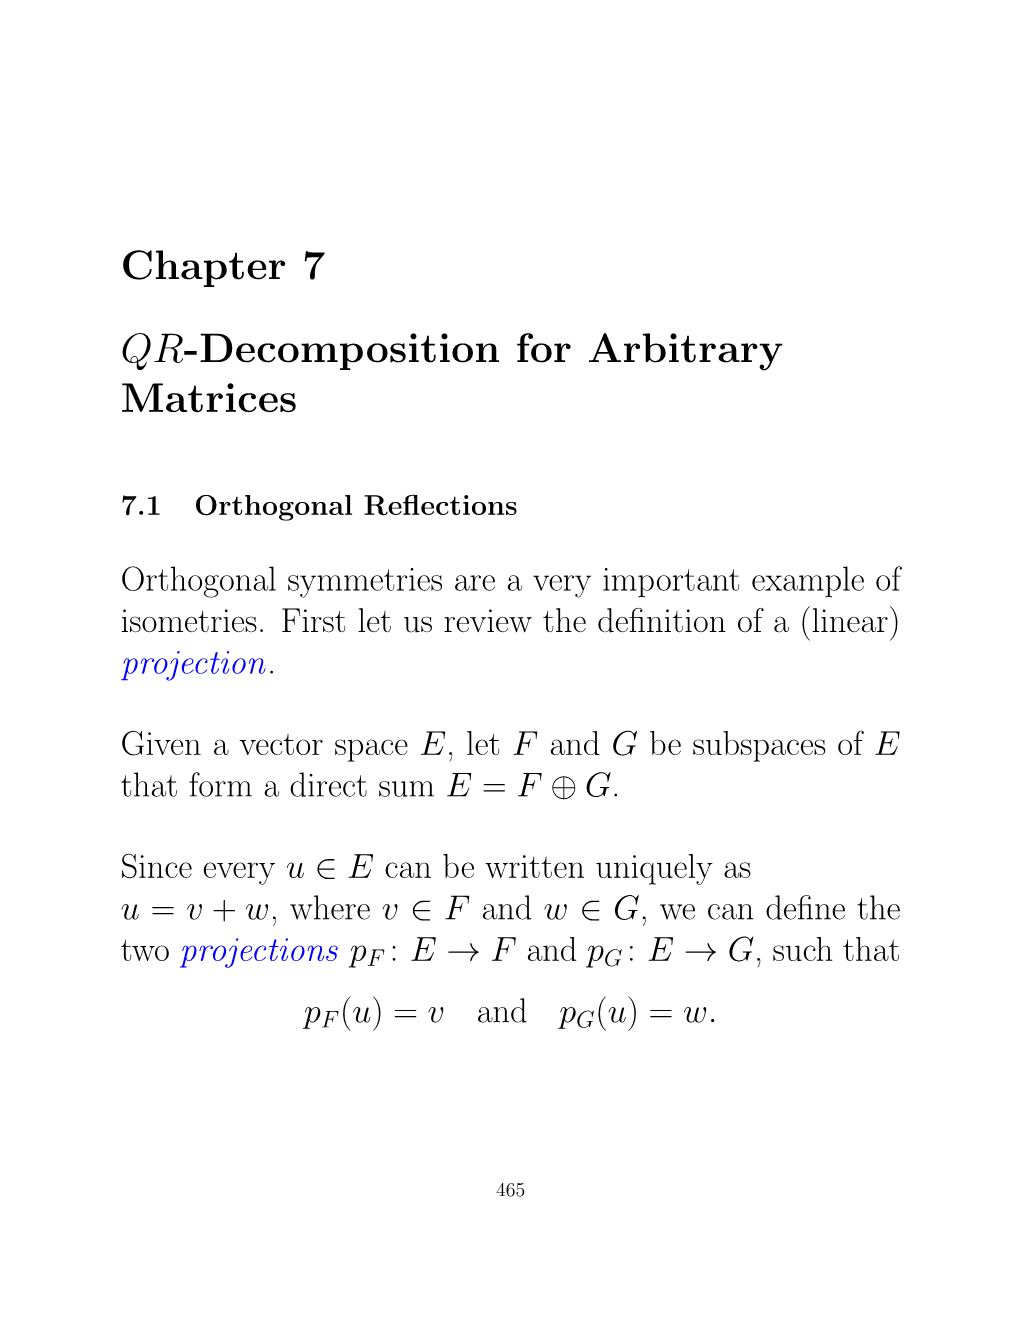 Chapter 7 QR-Decomposition for Arbitrary Matrices